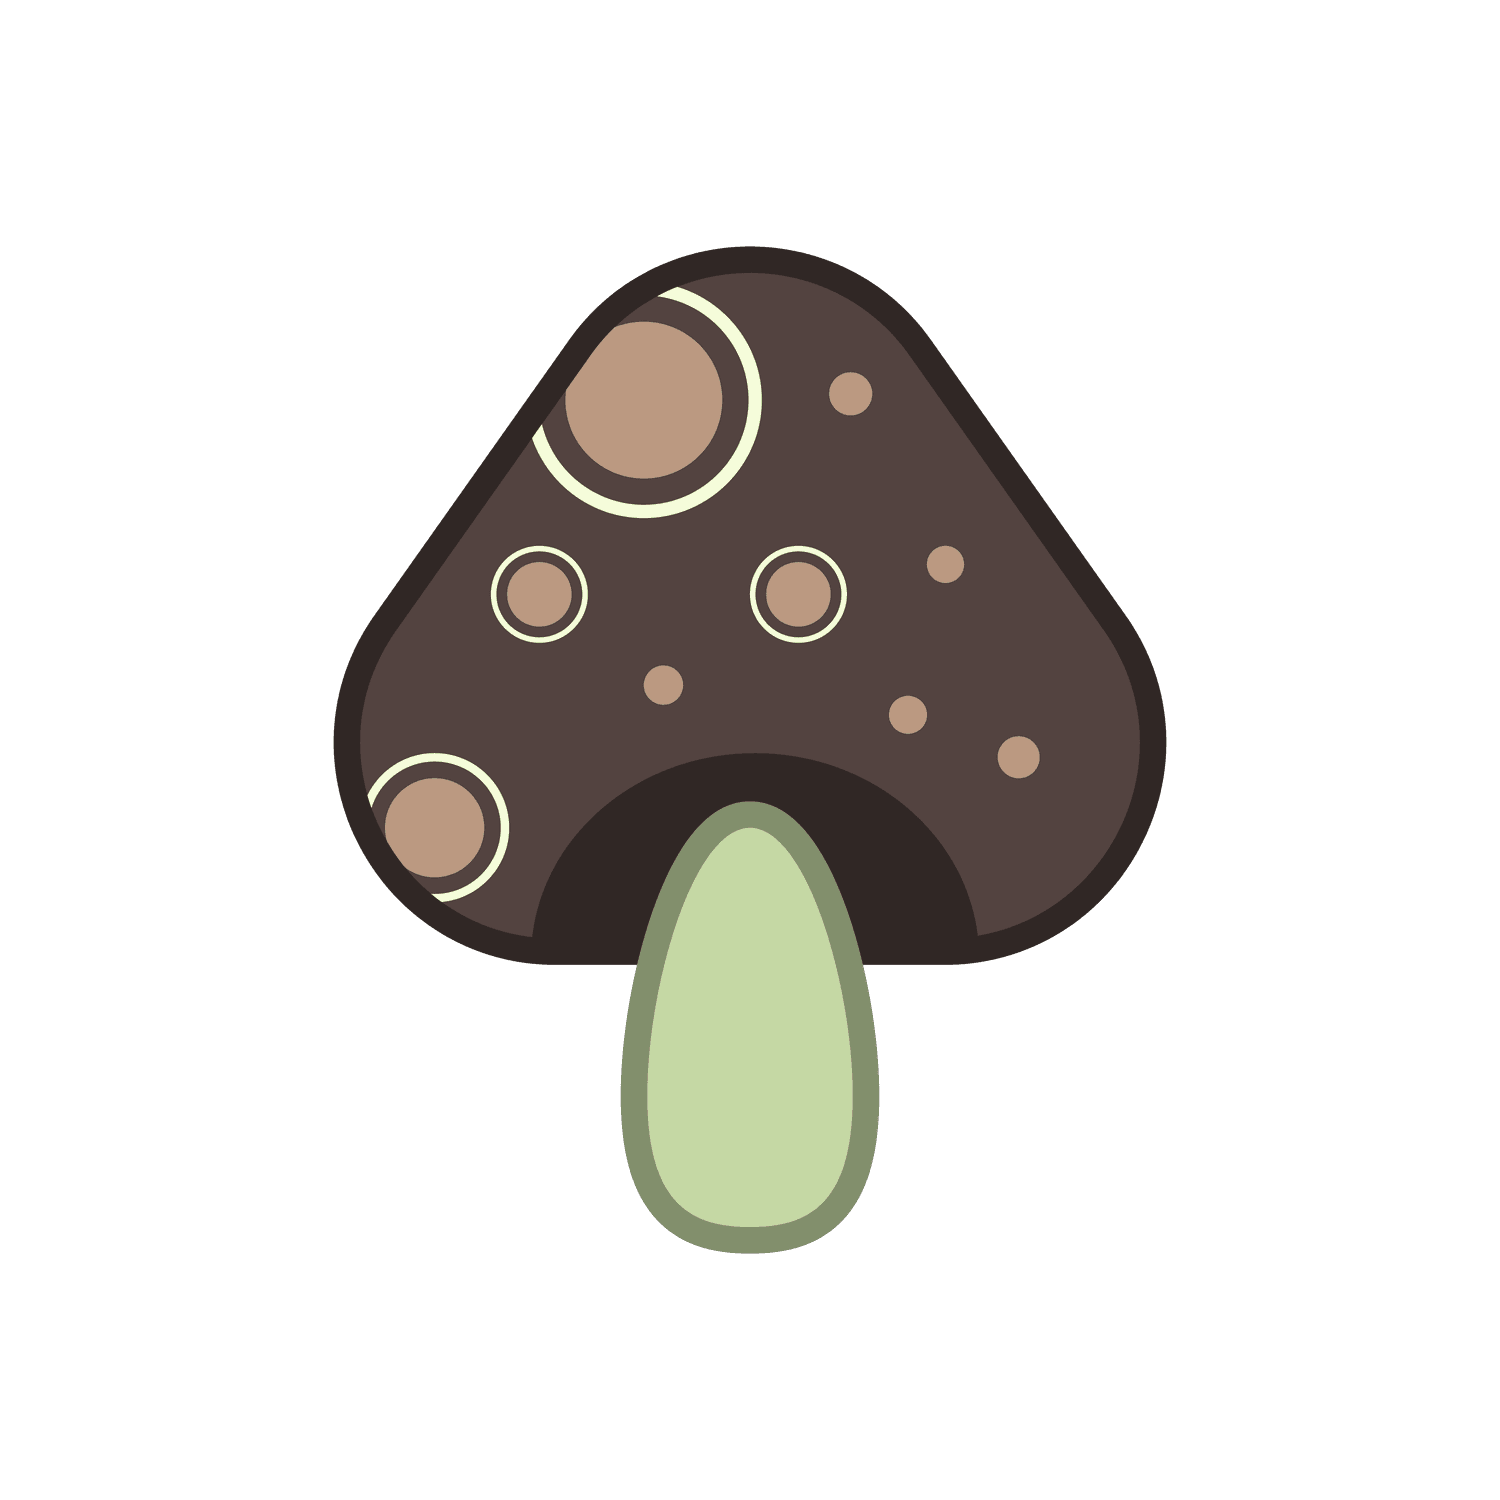 Hand drawn mushroom icon with classic colors